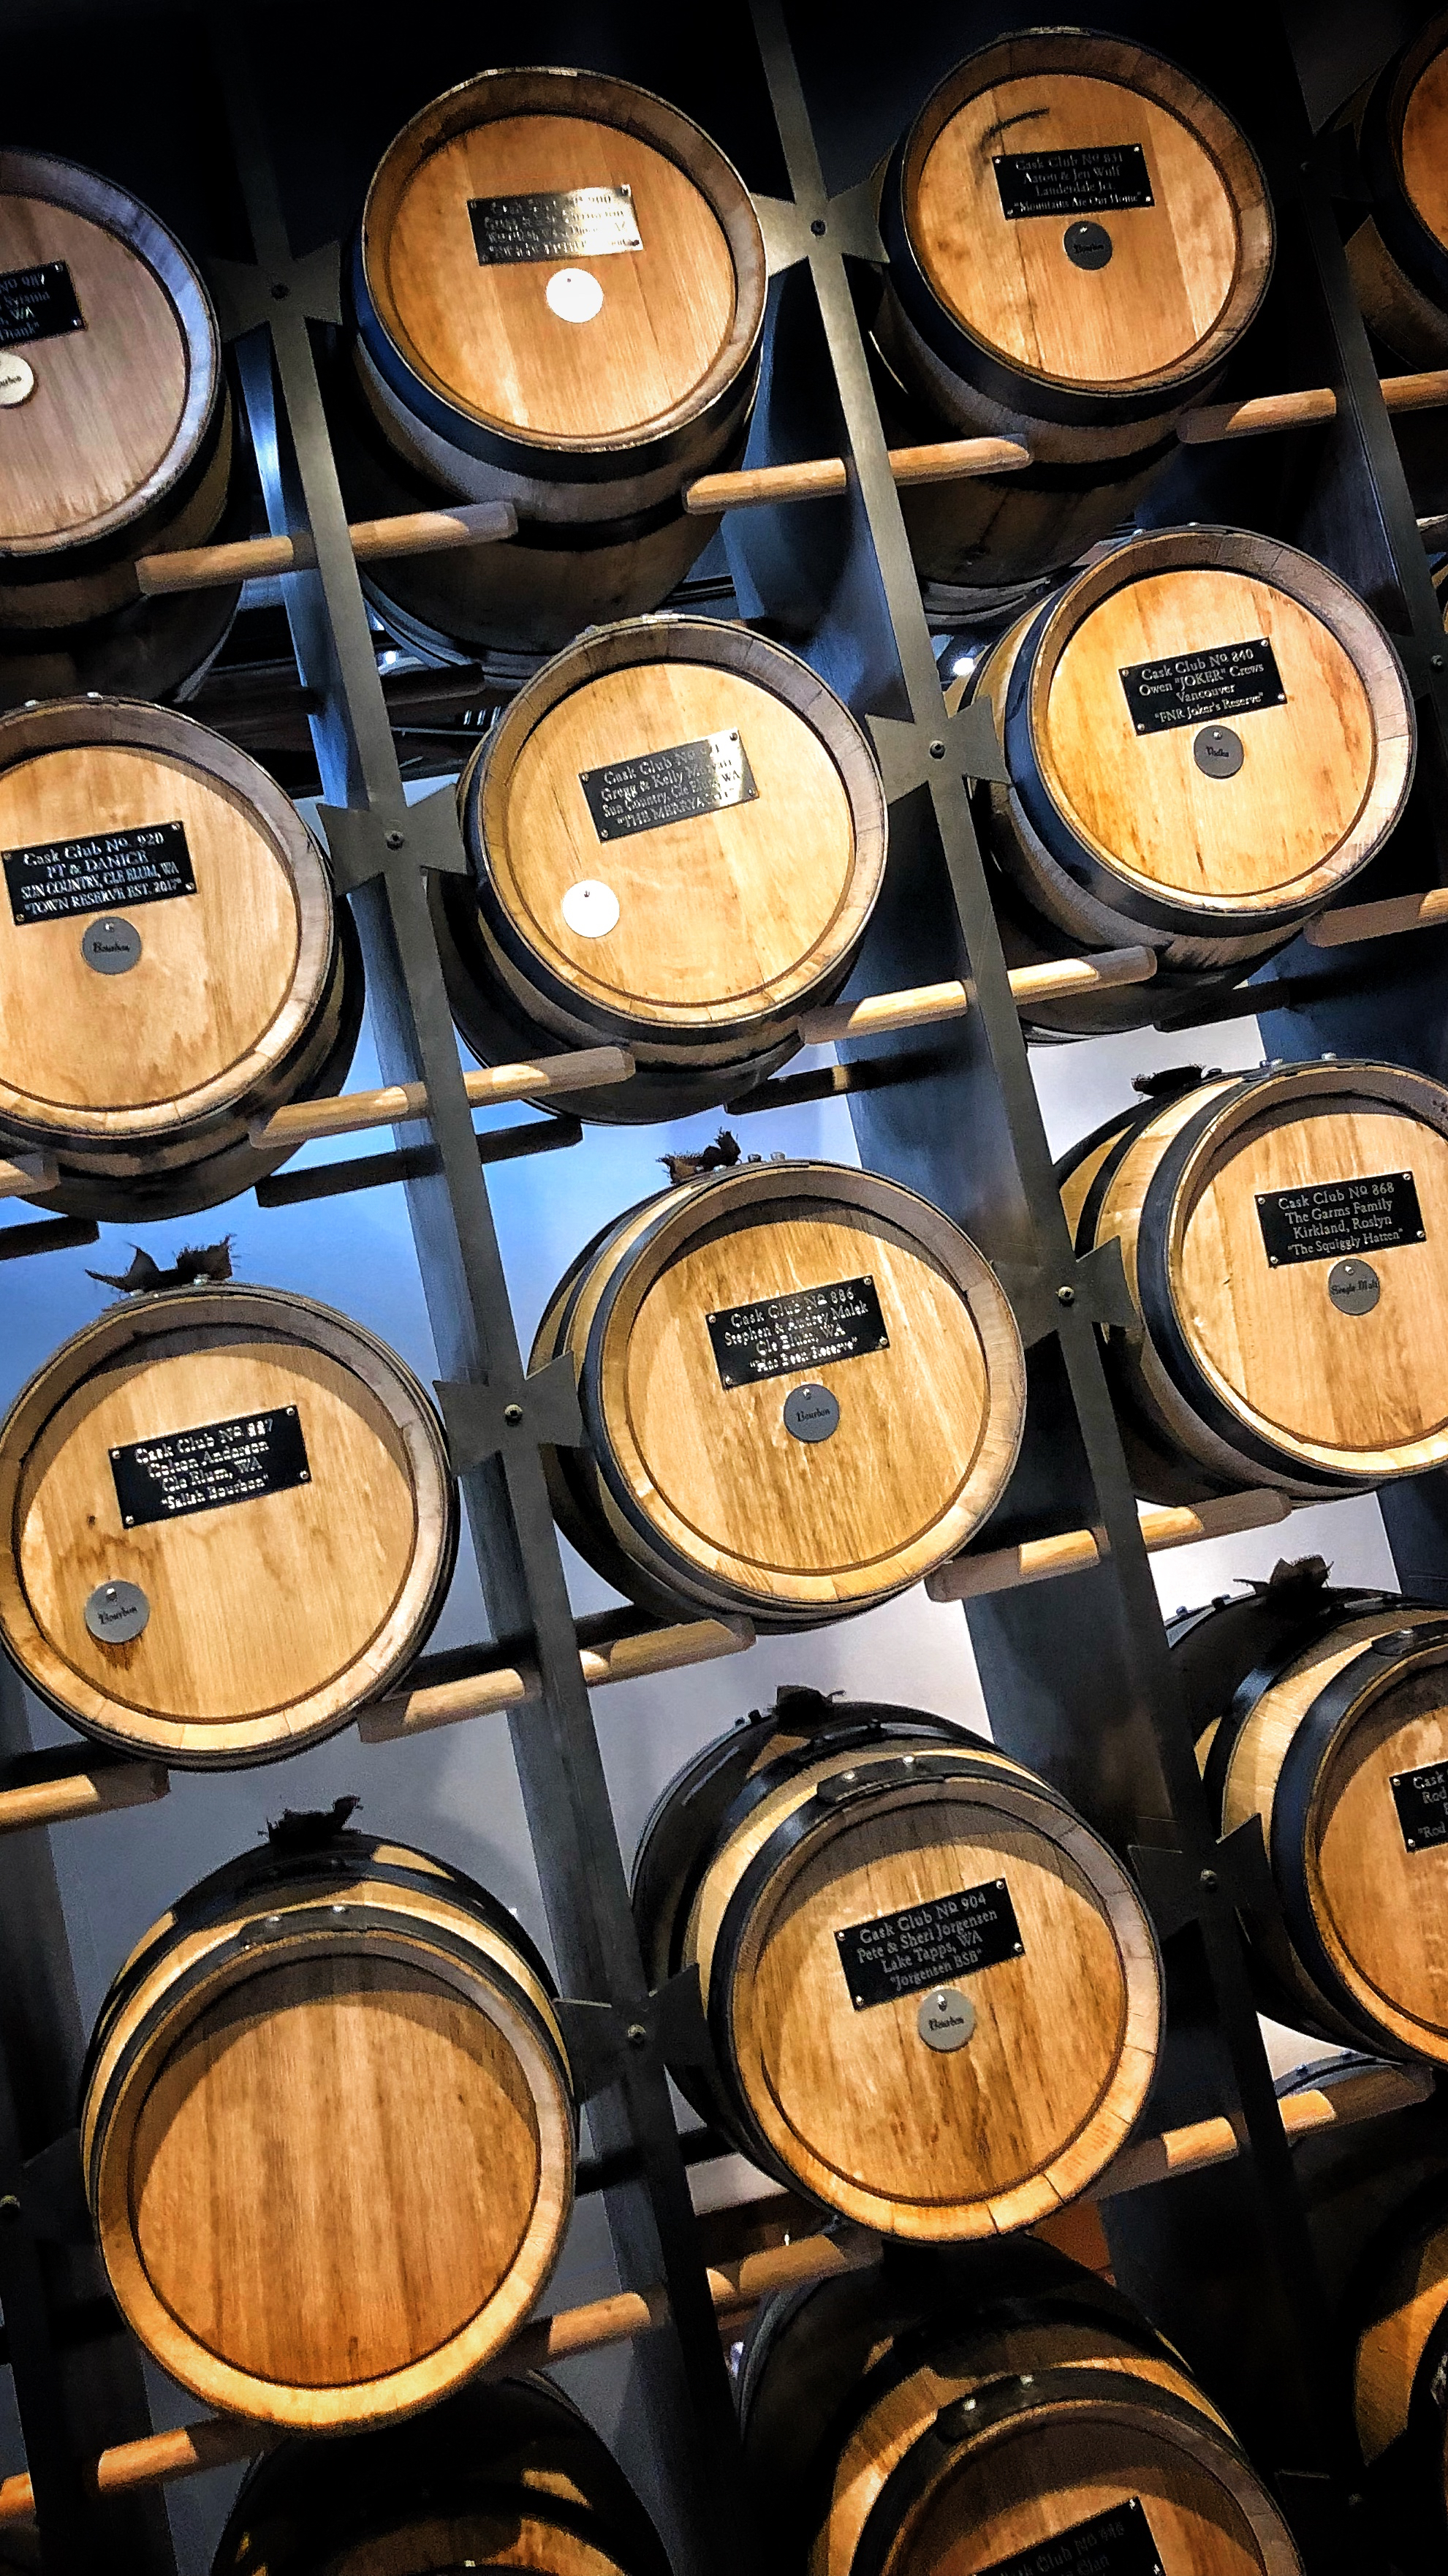  Heritage has a barrel program. Fill your own barrel and bottle it when it gets perfect for you. They'll even add a vanilla bean or orange peels if you want to try your hand at infusing. 